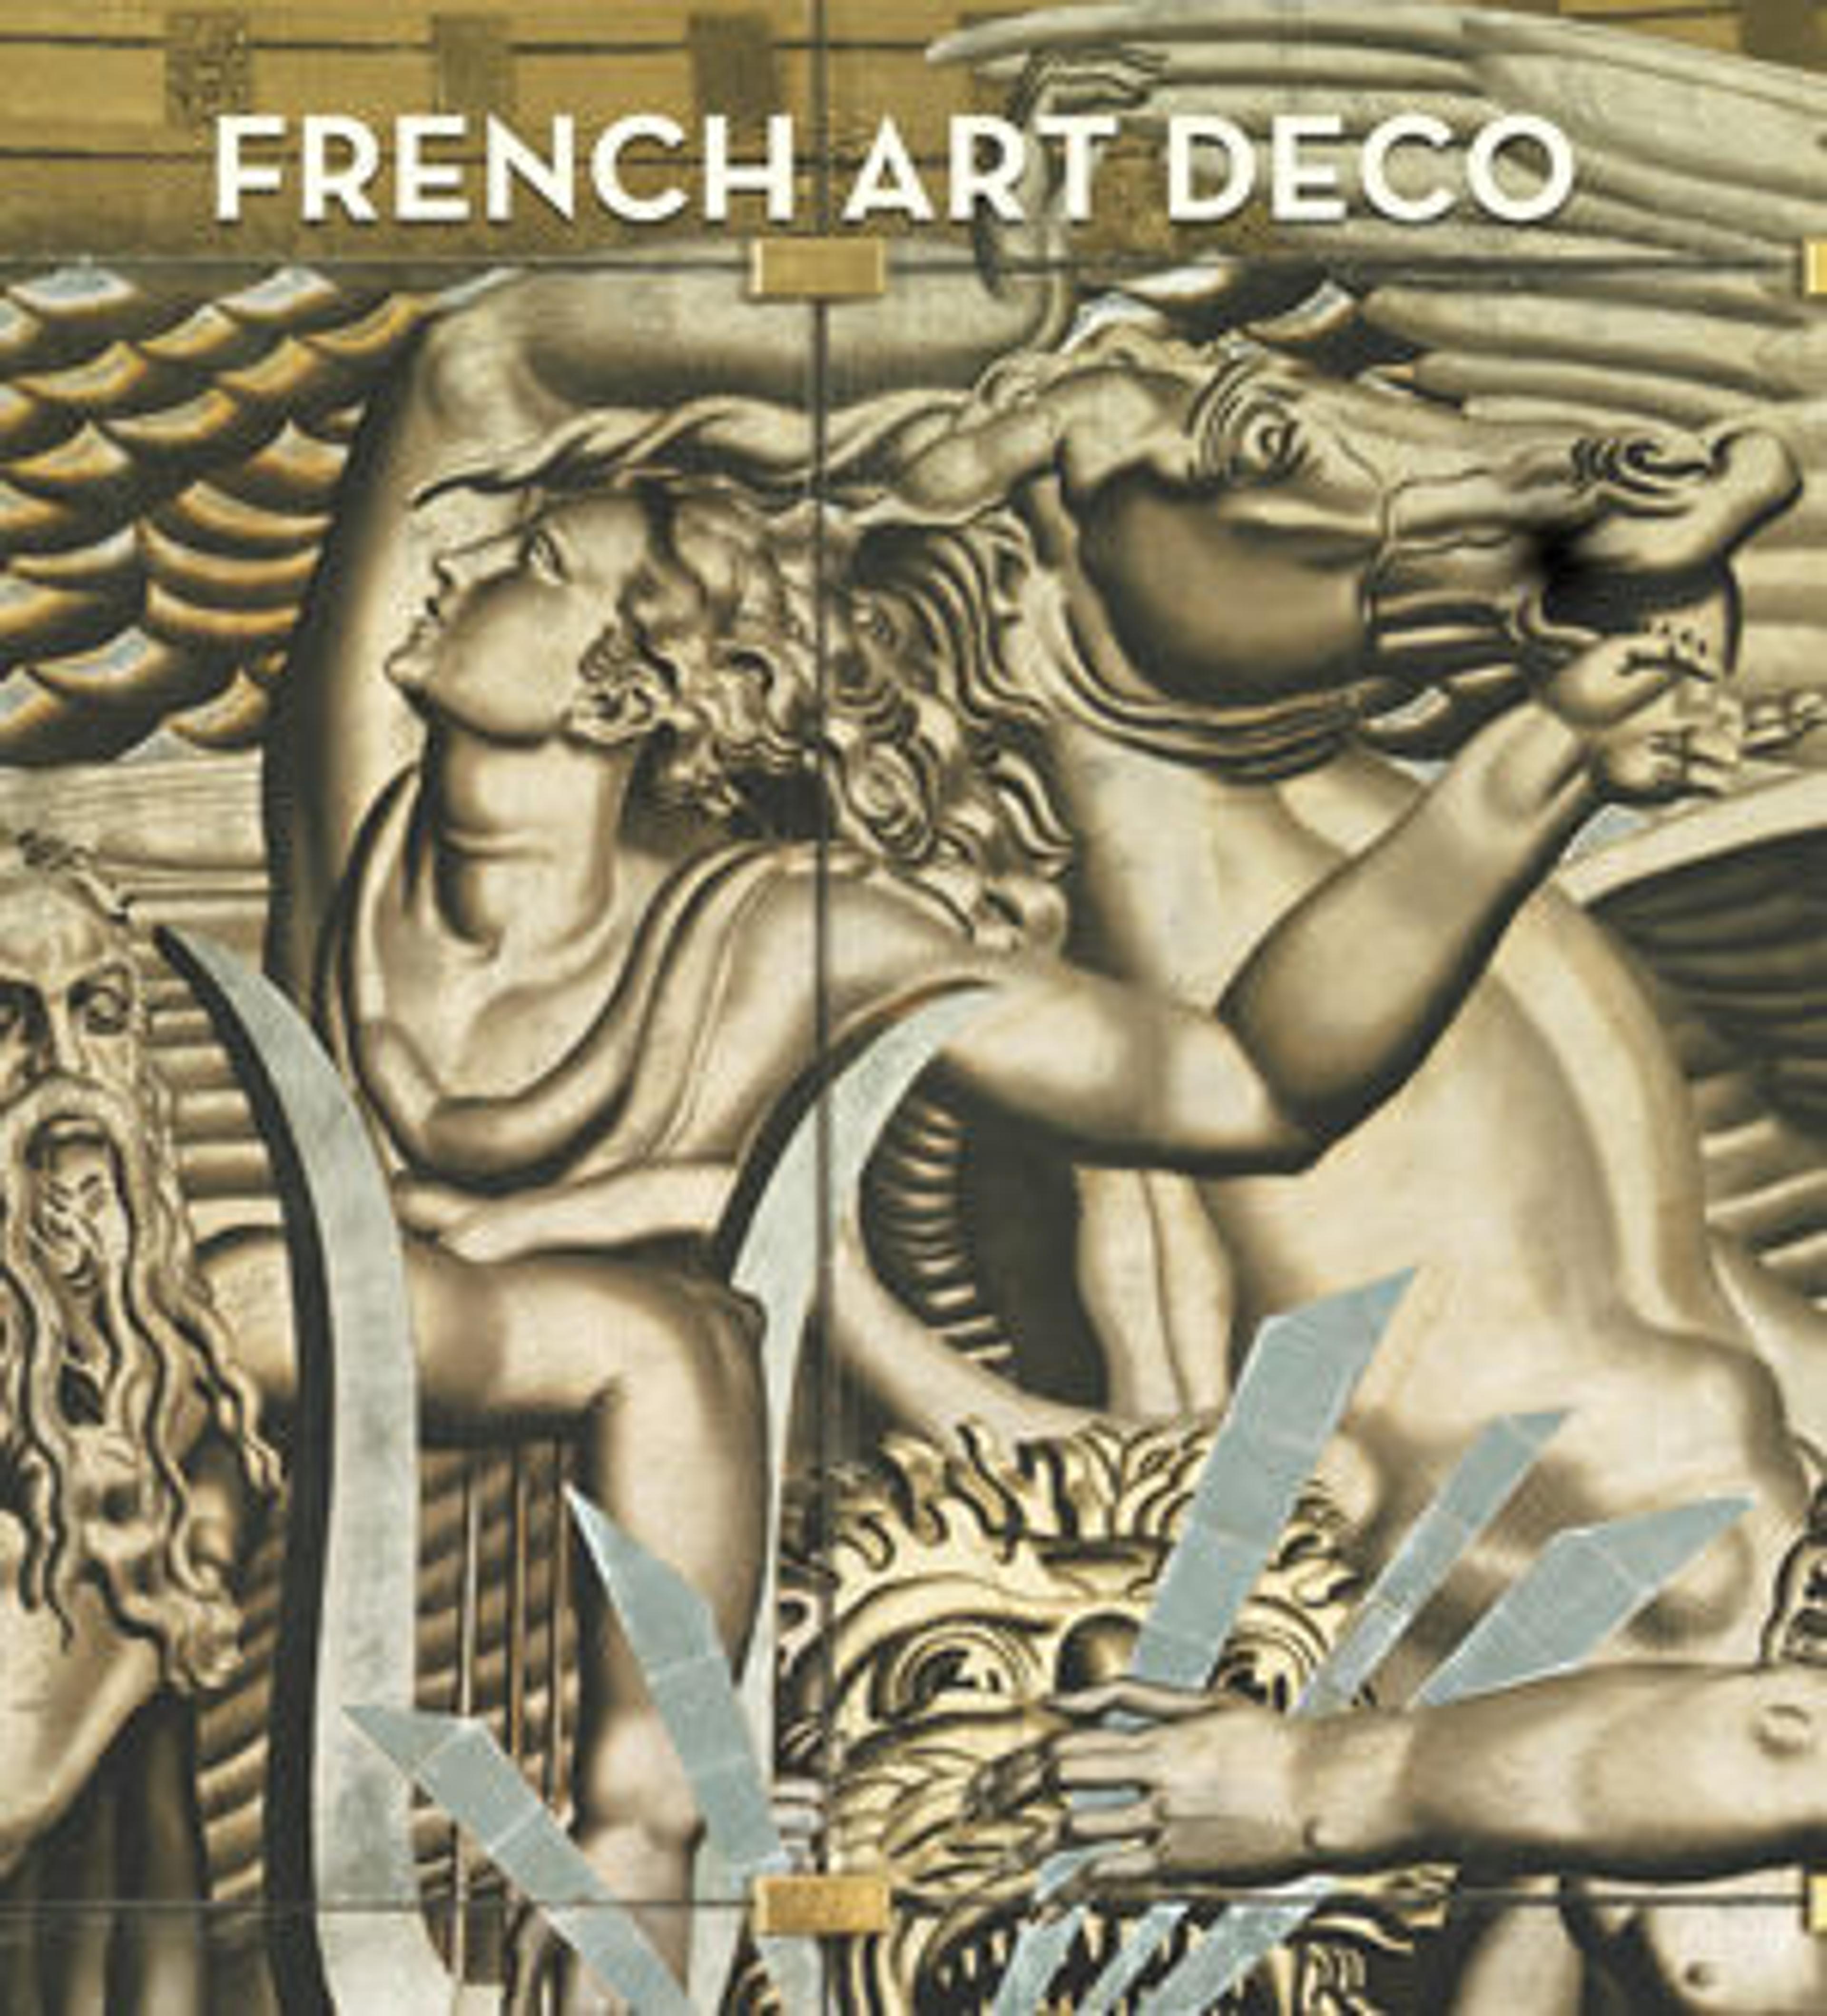 French Art Deco, by Jared Goss, features 280 full-color illustrations and is available at The Met Store and MetPublications.